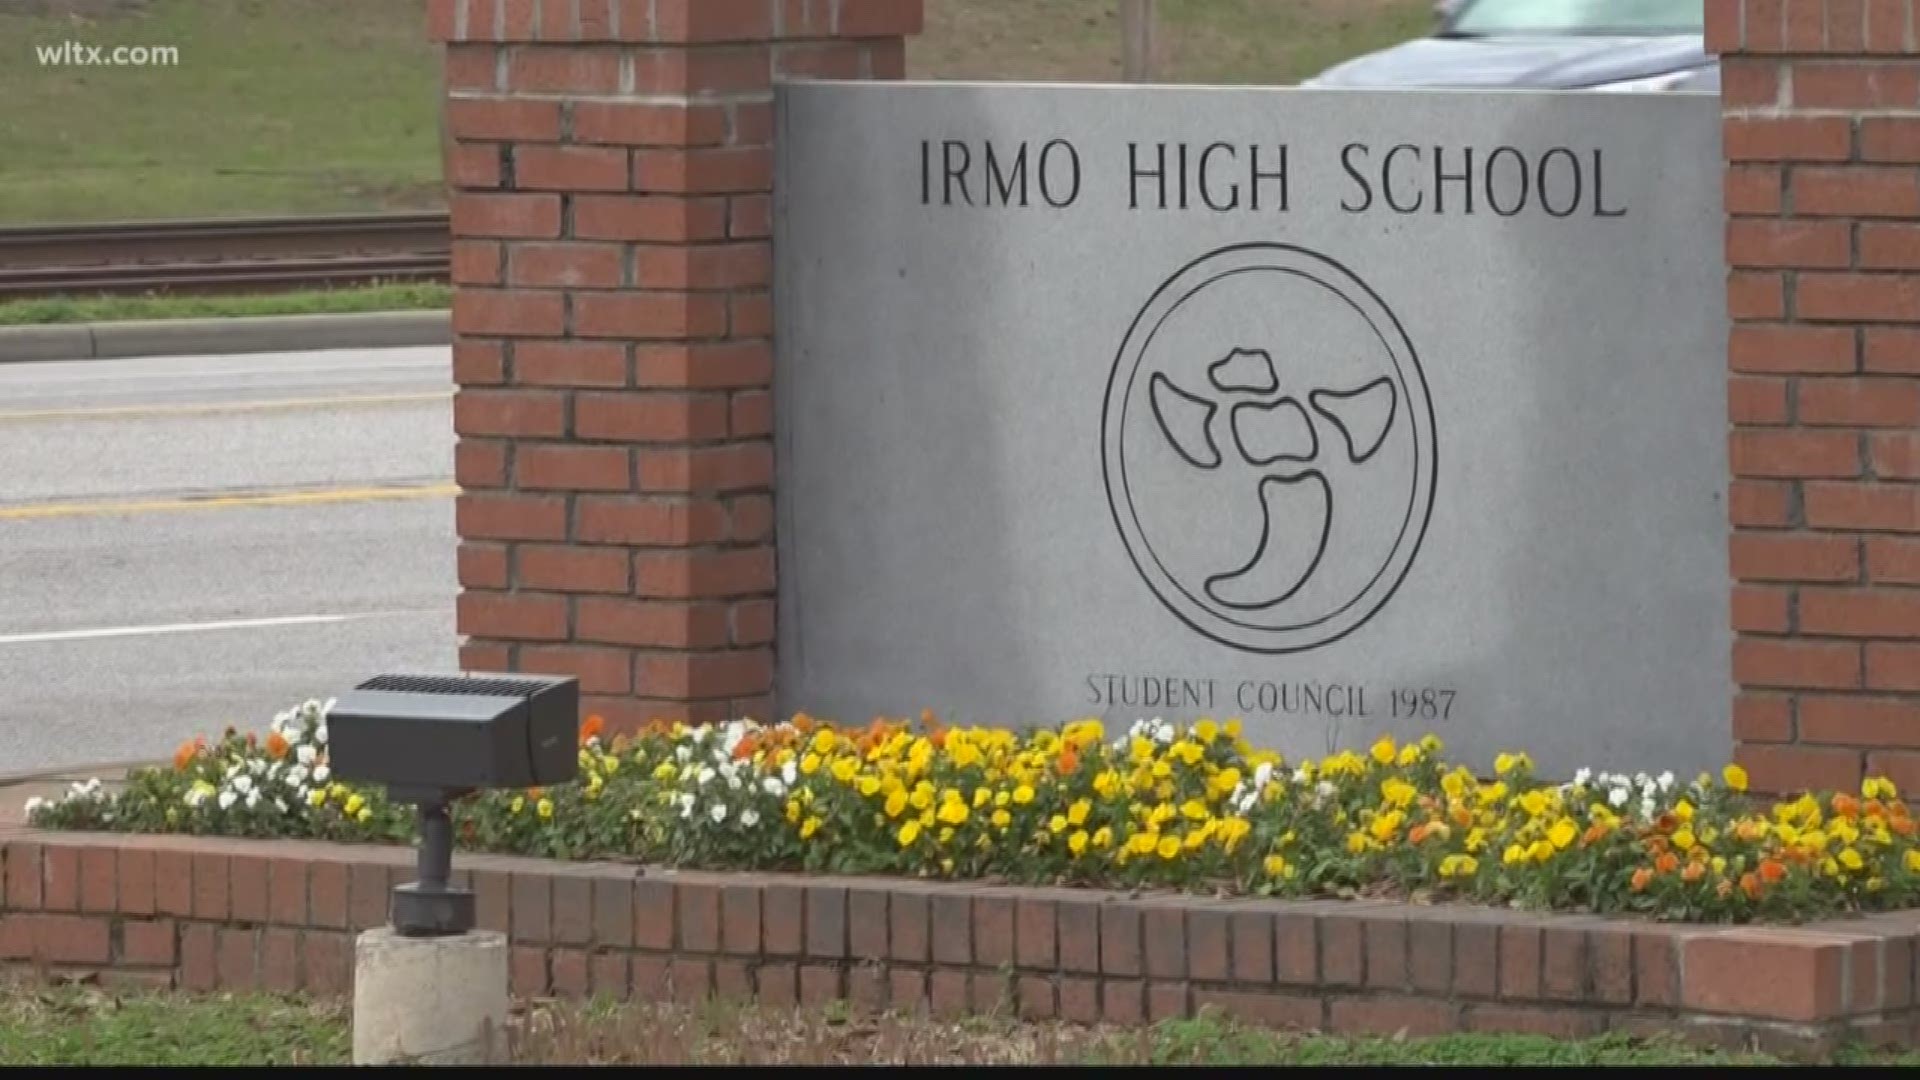 They are asking the community to send in nominations  who may be graduates or former faculty/staff of Irmo High School.